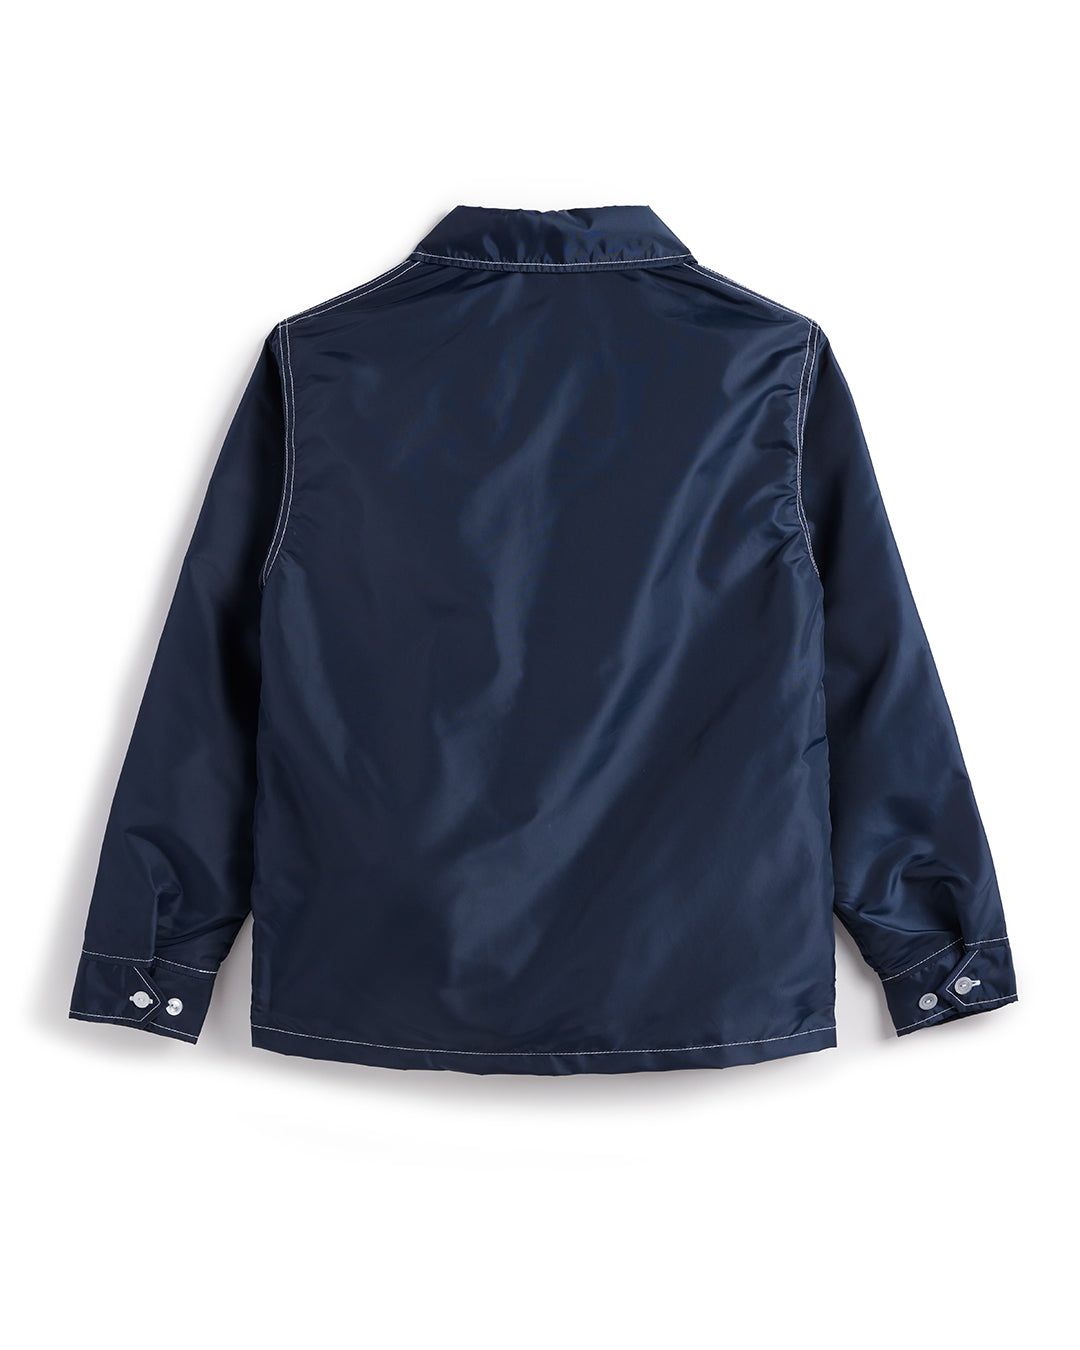 Competition Jacket - WHR Navy